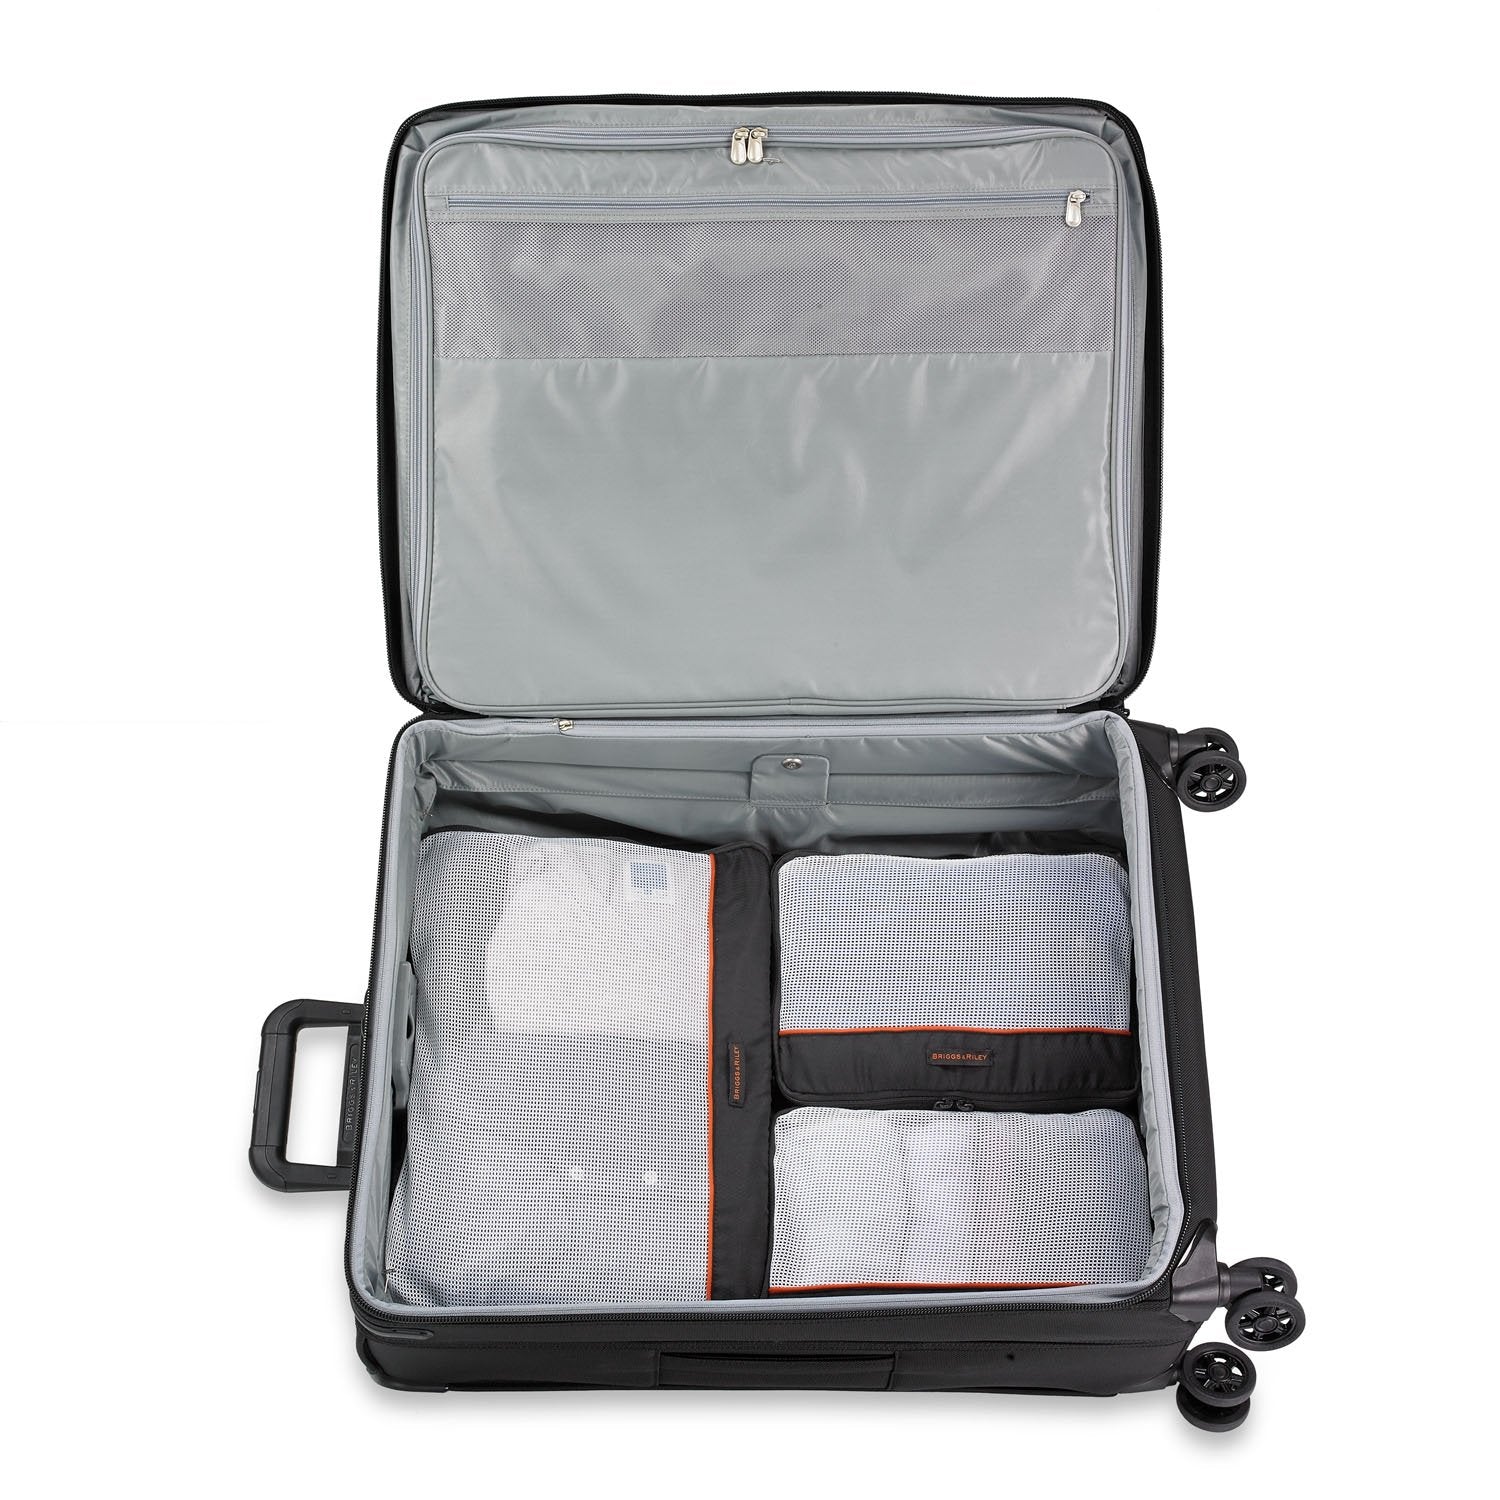 Briggs & Riley Accessories Packing Cubes Large Set W115-4